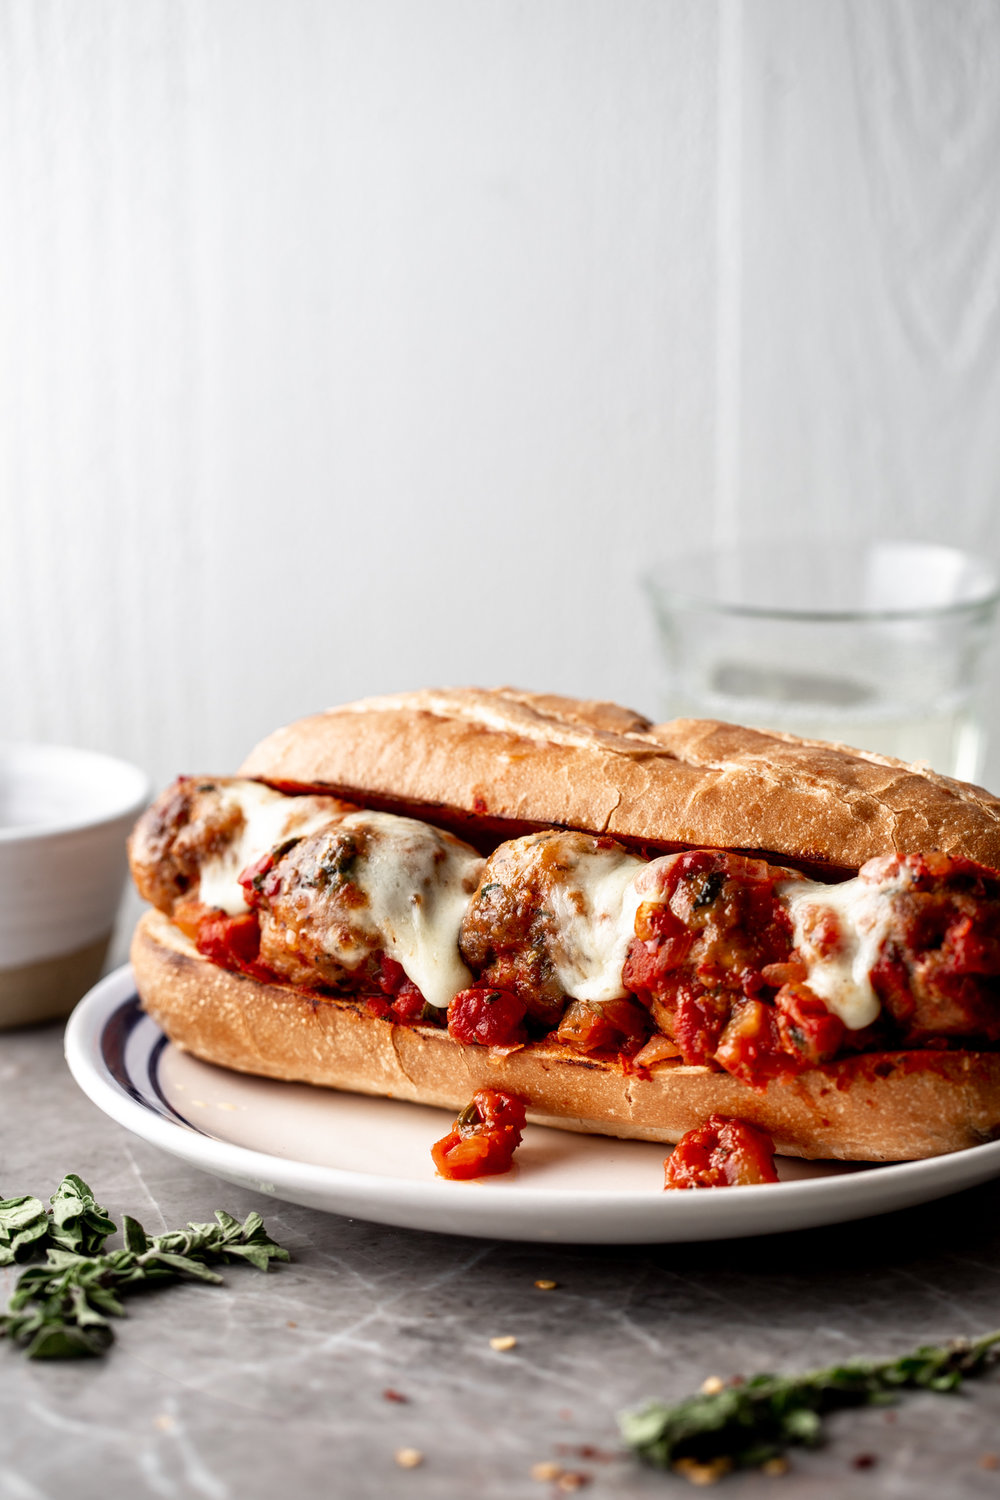 Meatball Subs with Spicy Beef and Pork Meatballs with melted mozzarella and provolone